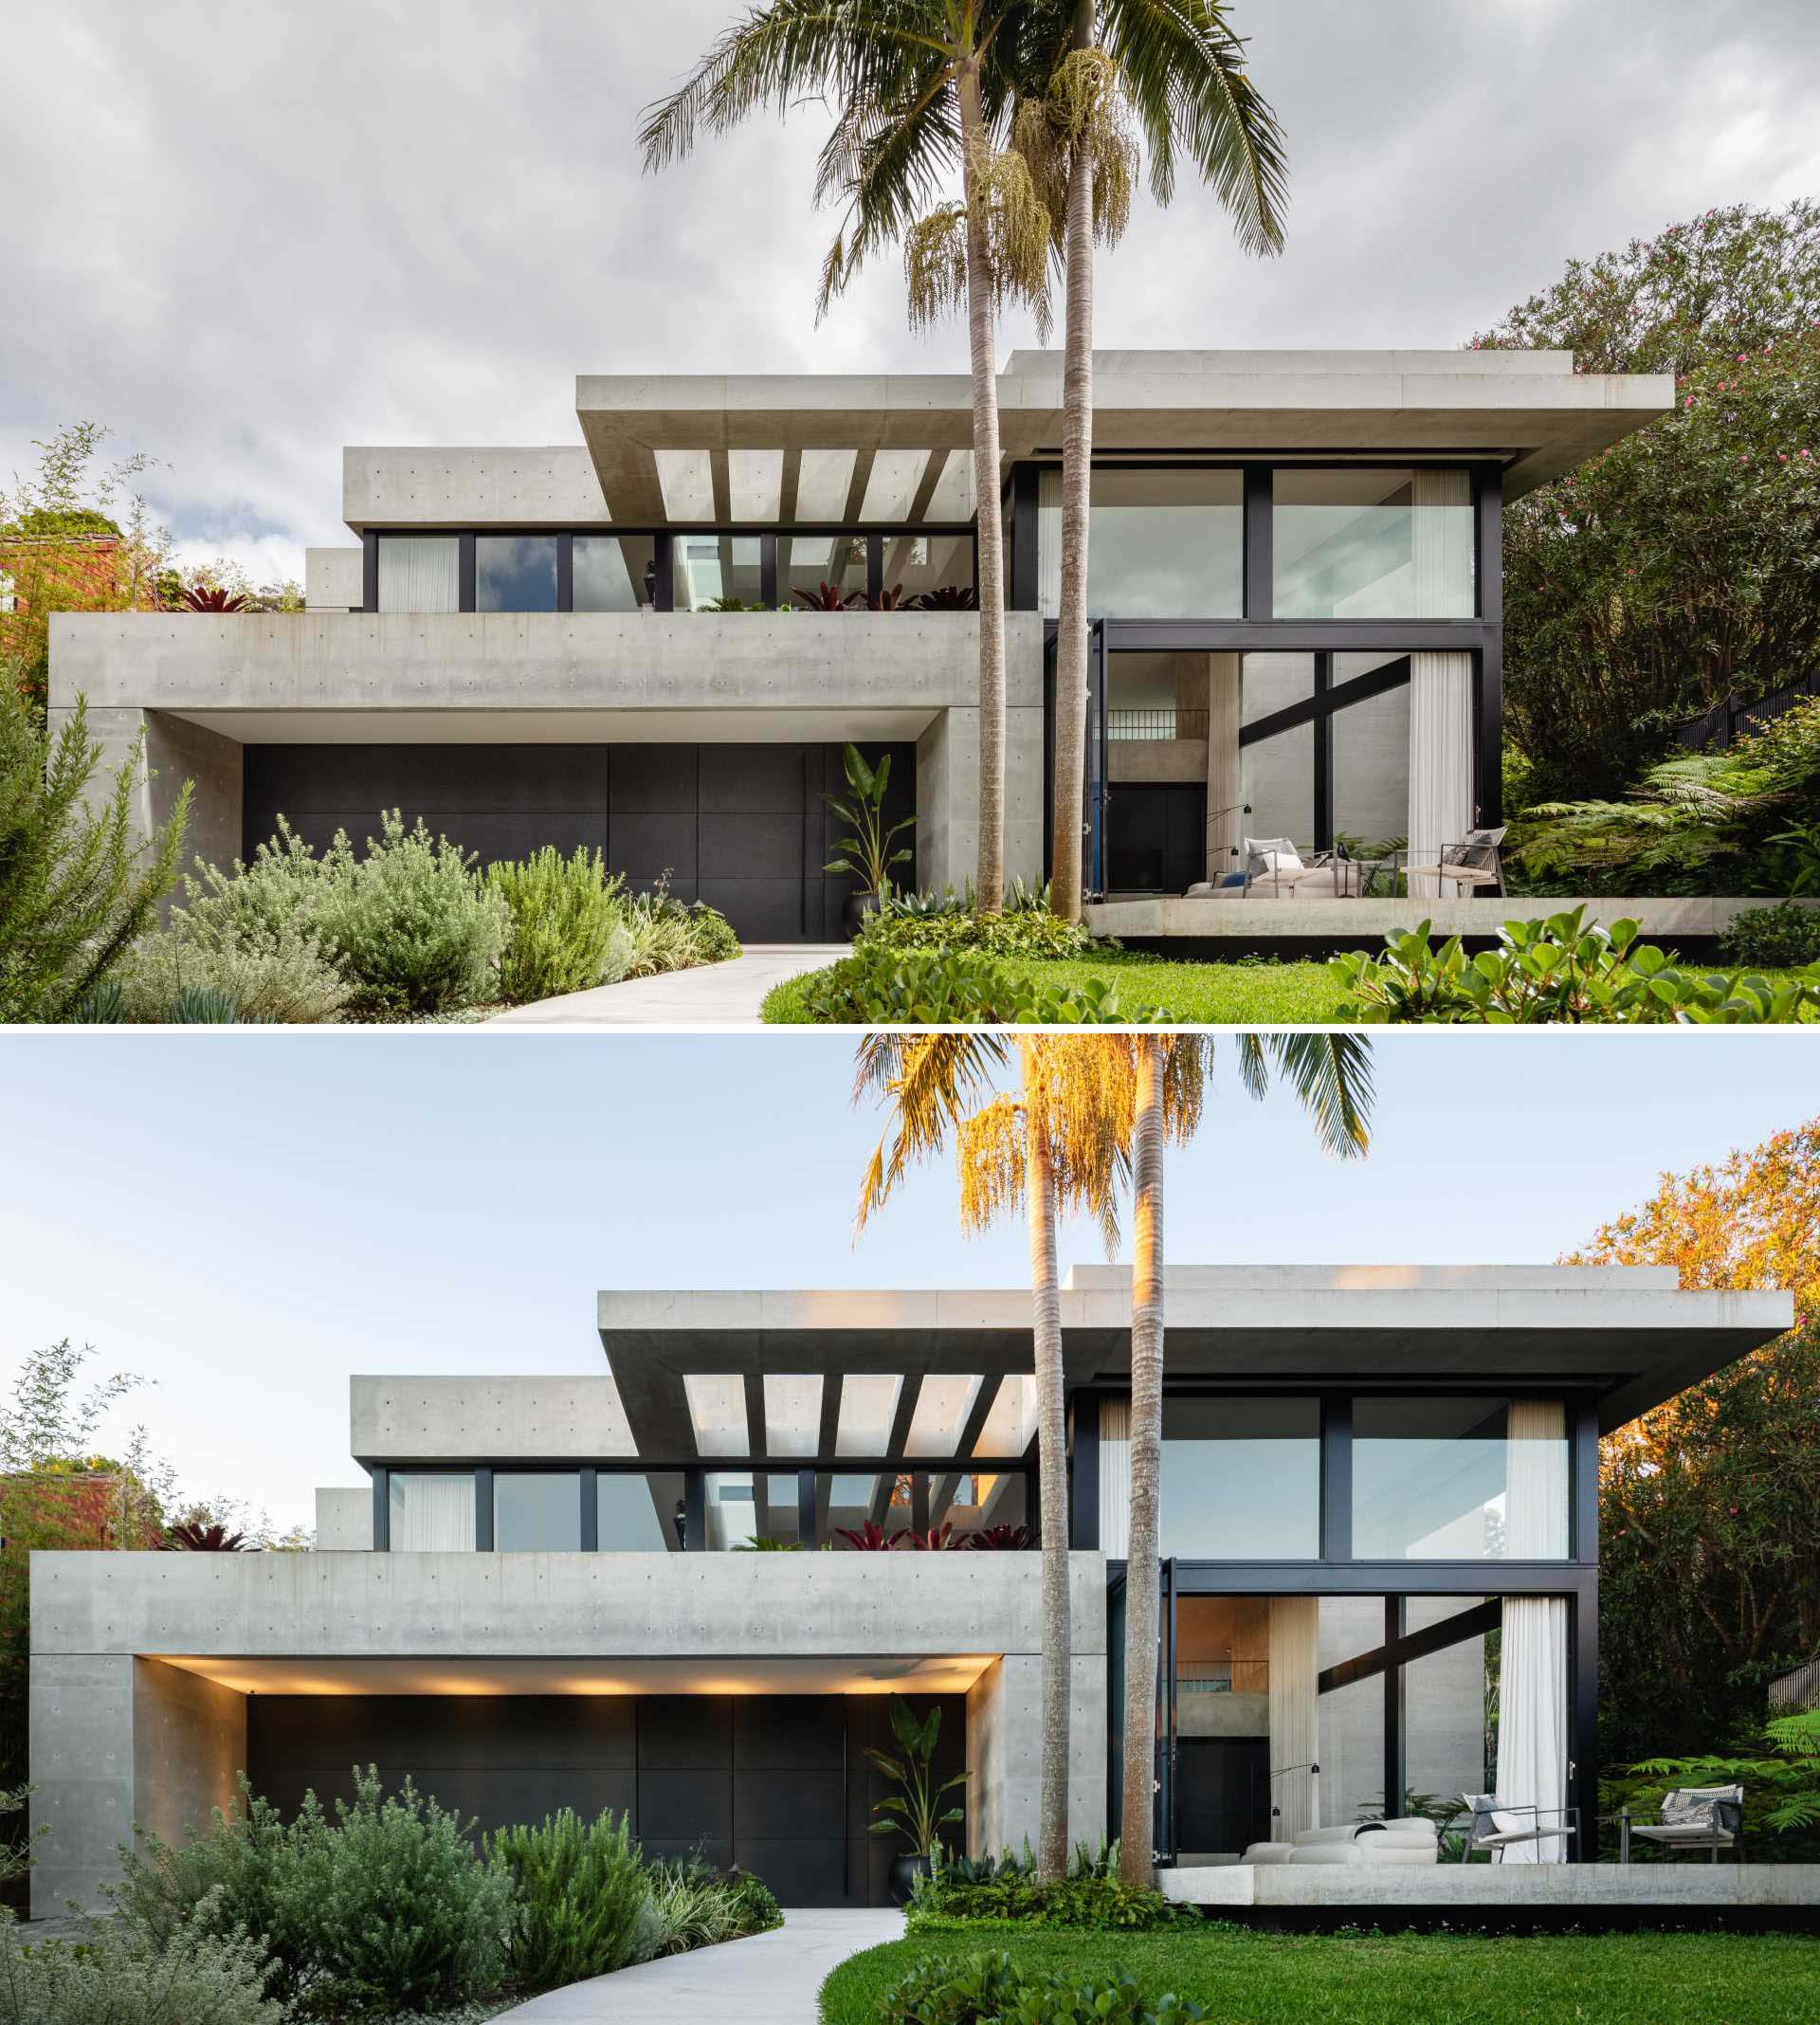 This modern home was designed around the two native Bangalow palms in the front garden, where a large flat landscaped area was created at the front of the house, defined by the level of the palm roots.